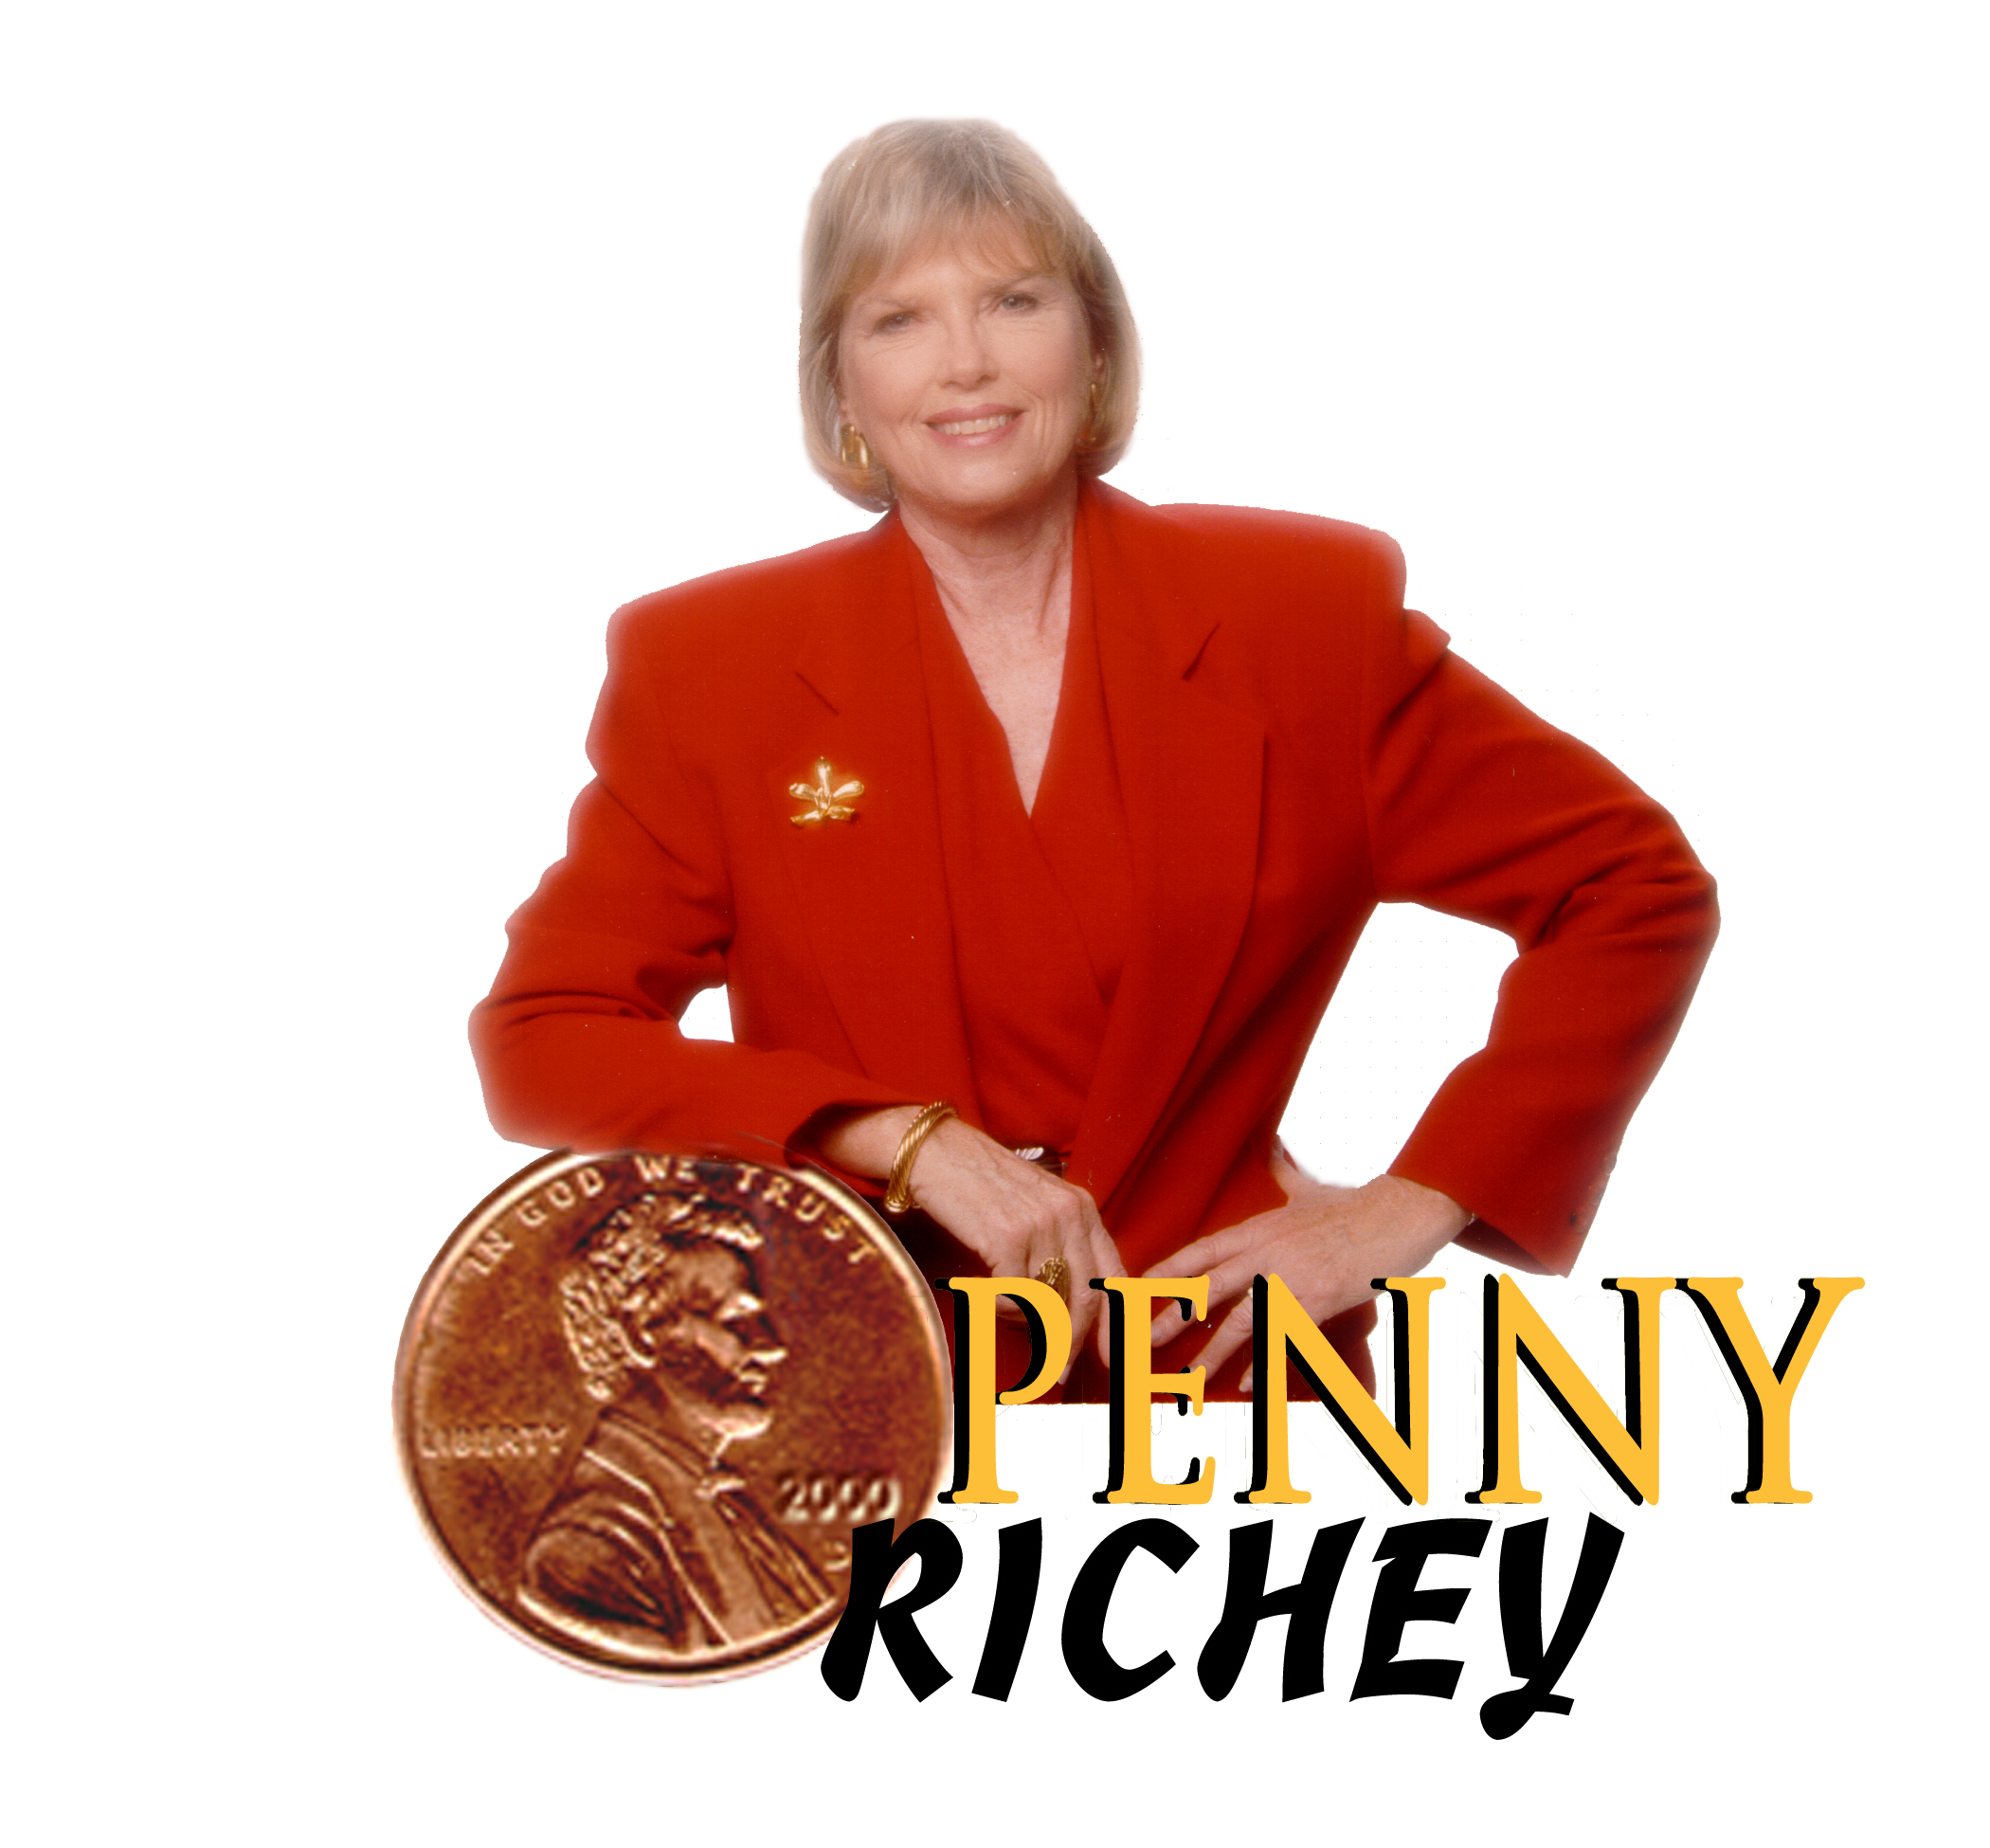 Click Here to View Penny Richey's Web Site